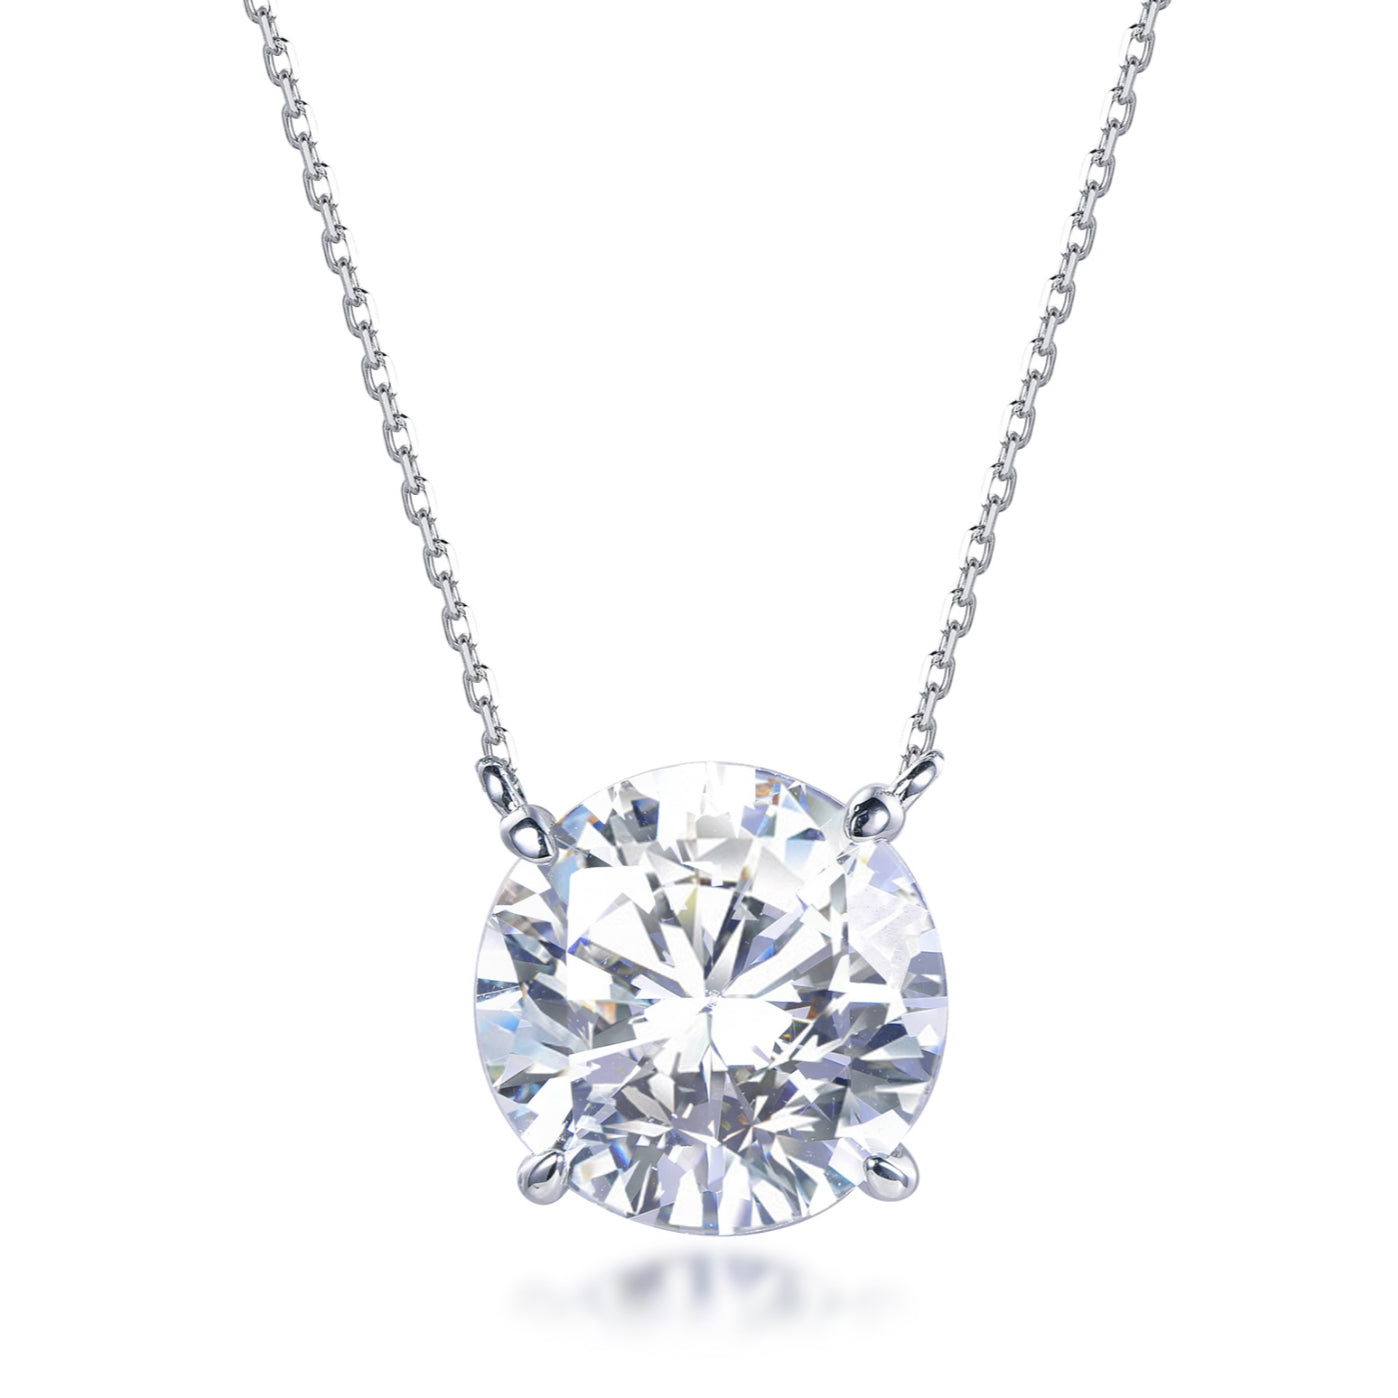 Rhodium Plated Sterling Silver CZ Solitaire Necklace